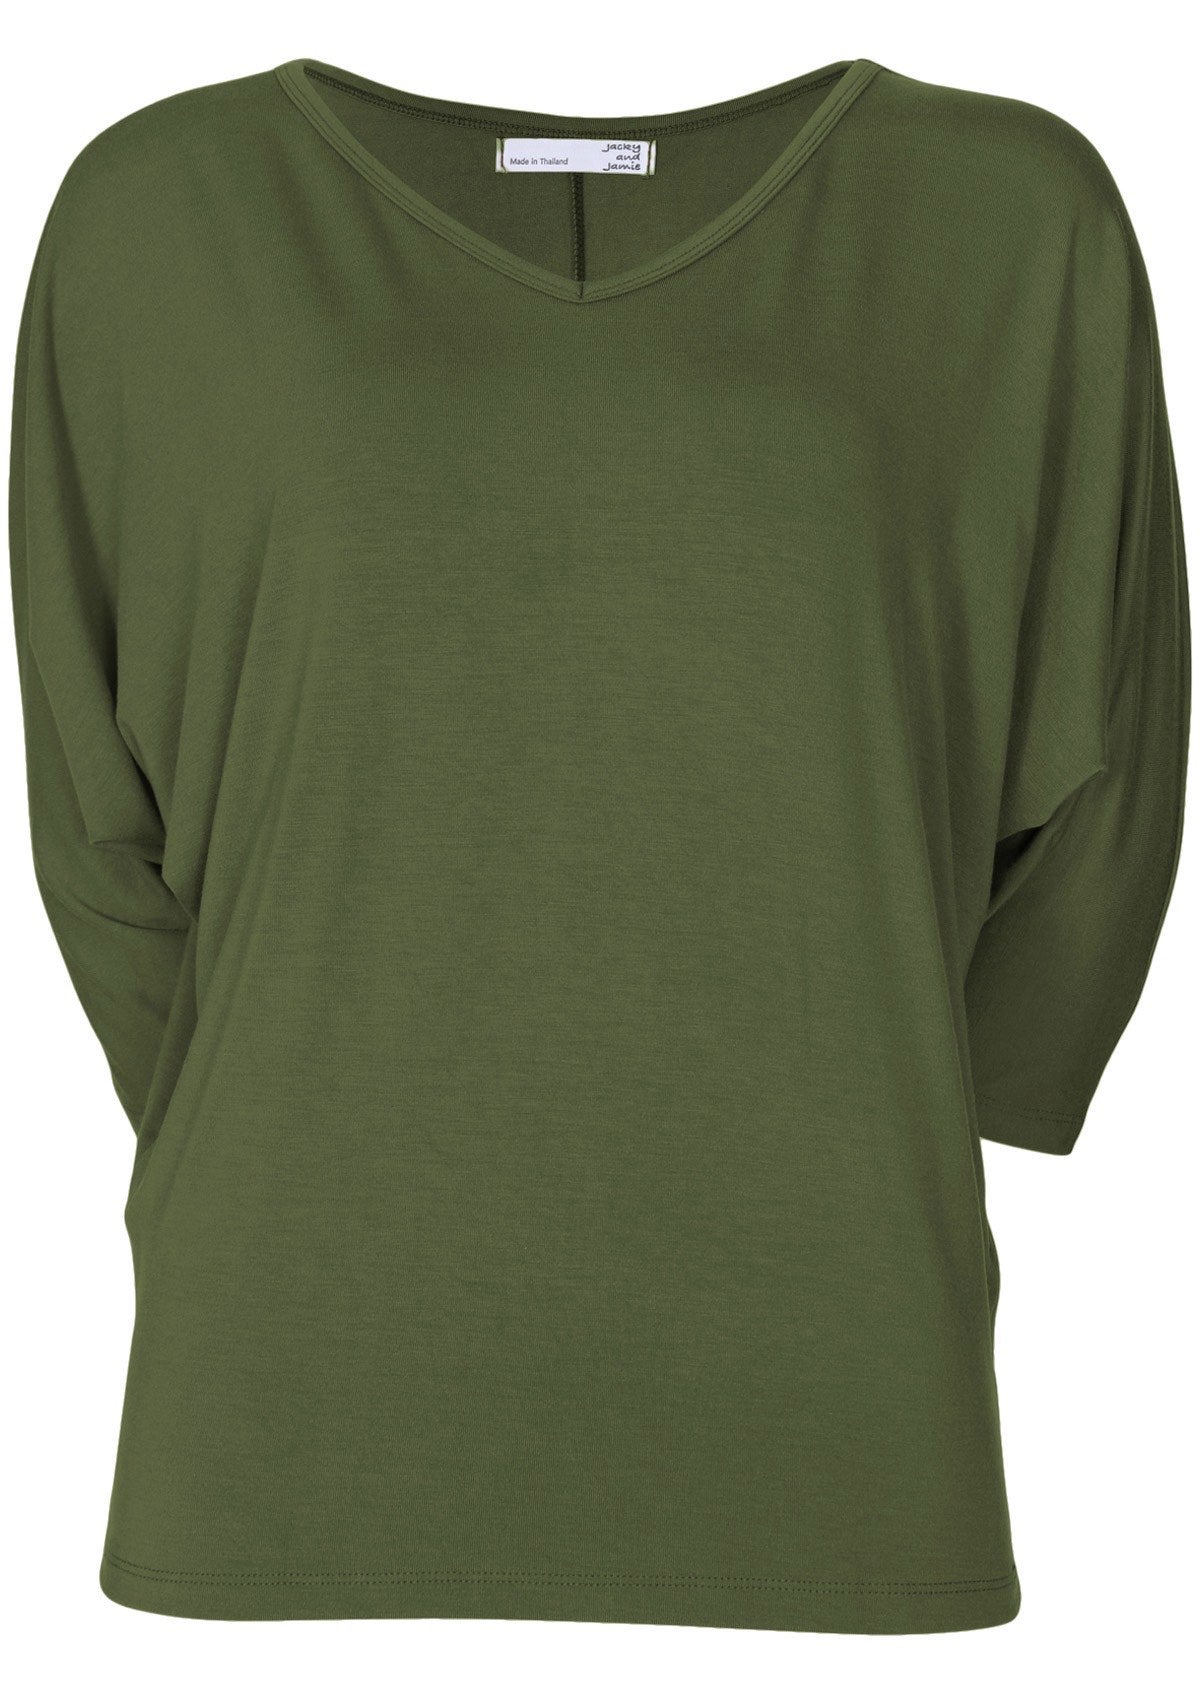 Front view of women's 3/4 sleeve rayon batwing v-neck olive top.